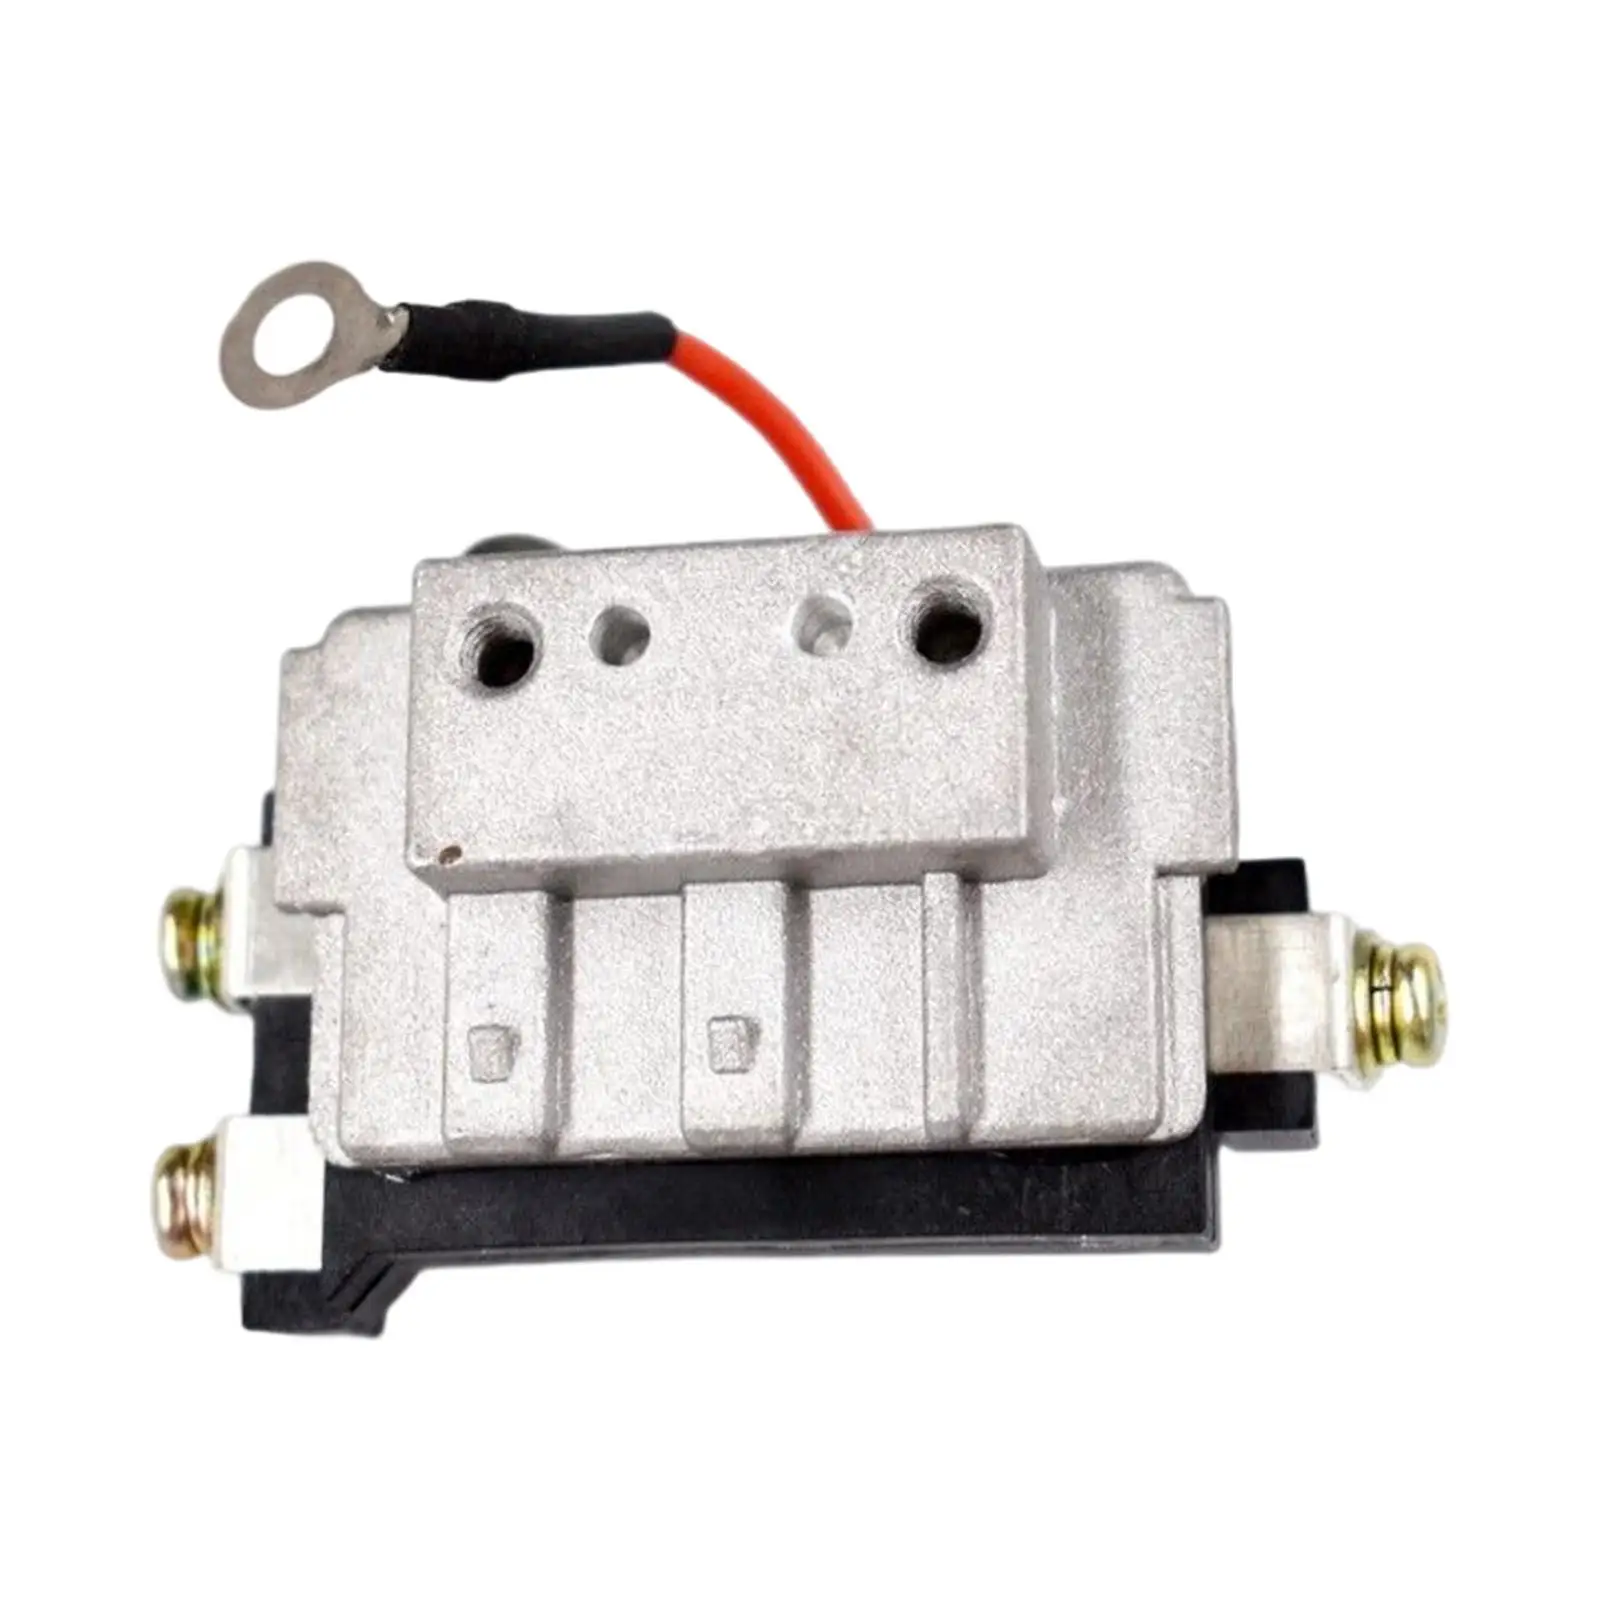 Ignition Control Module Accessories Replaces Durable for Toyota Corolla